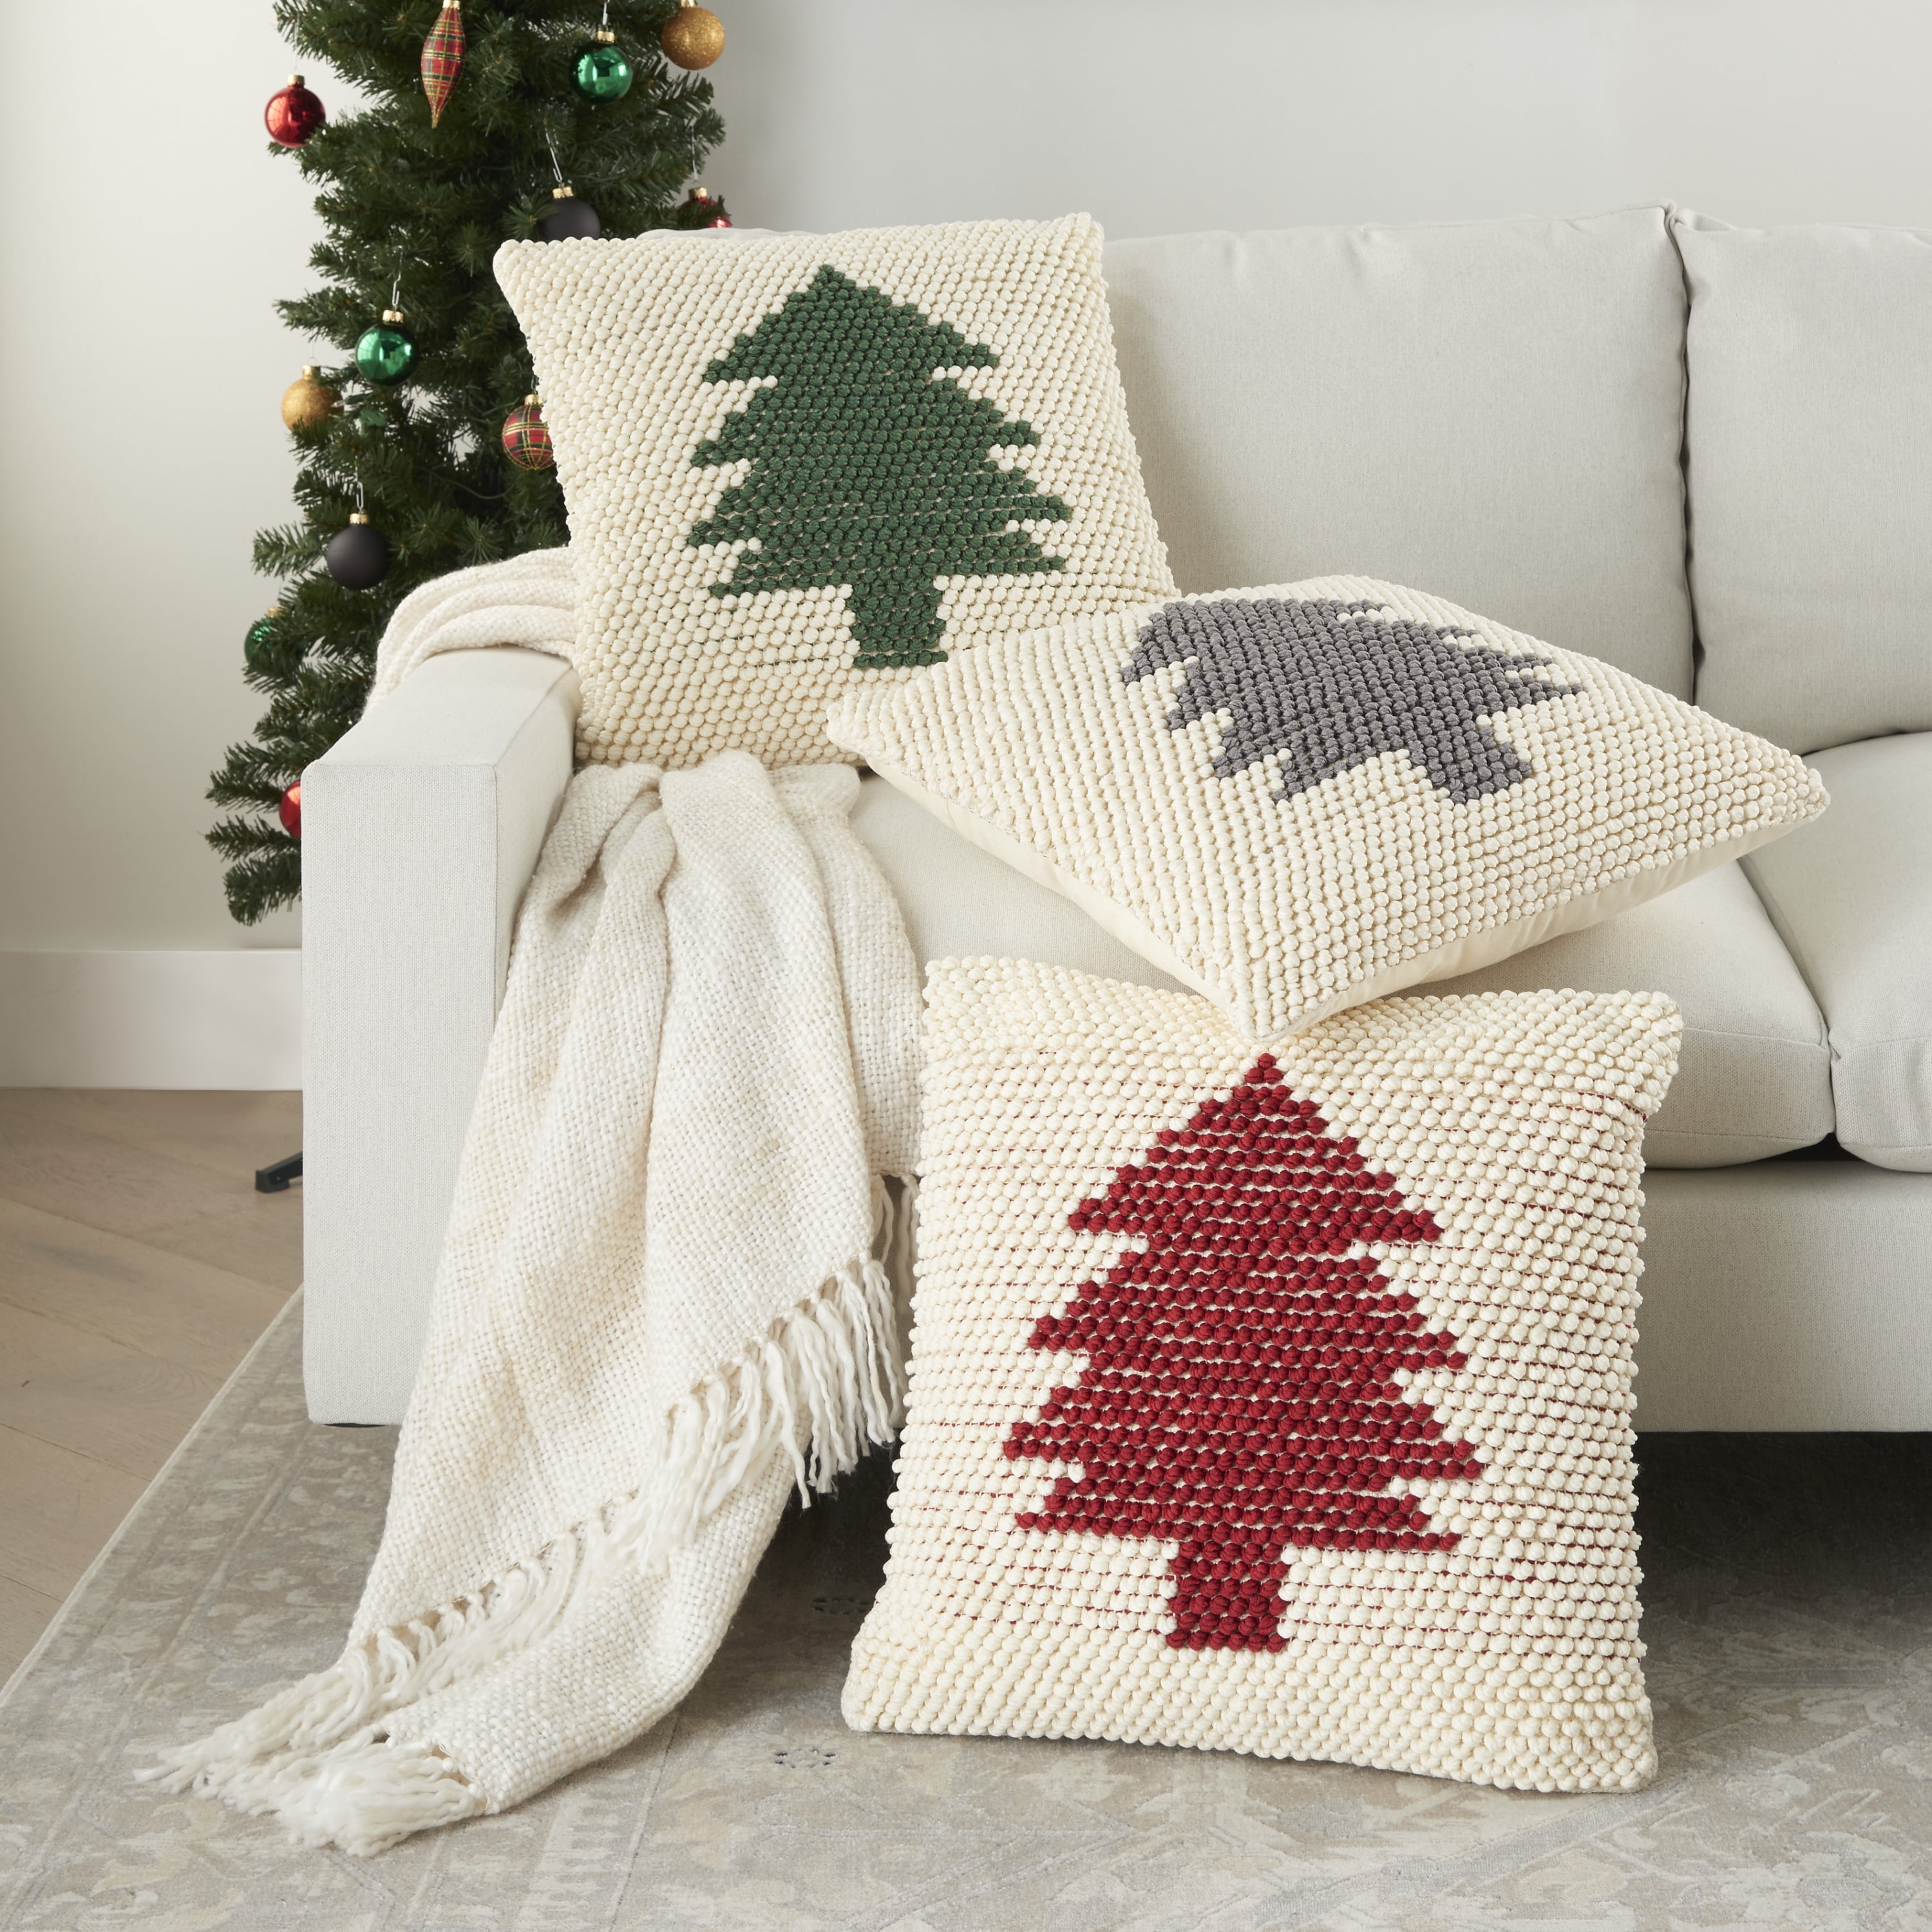 Primitive Country Christmas Tree Throw Pillow by Artsy Mouse